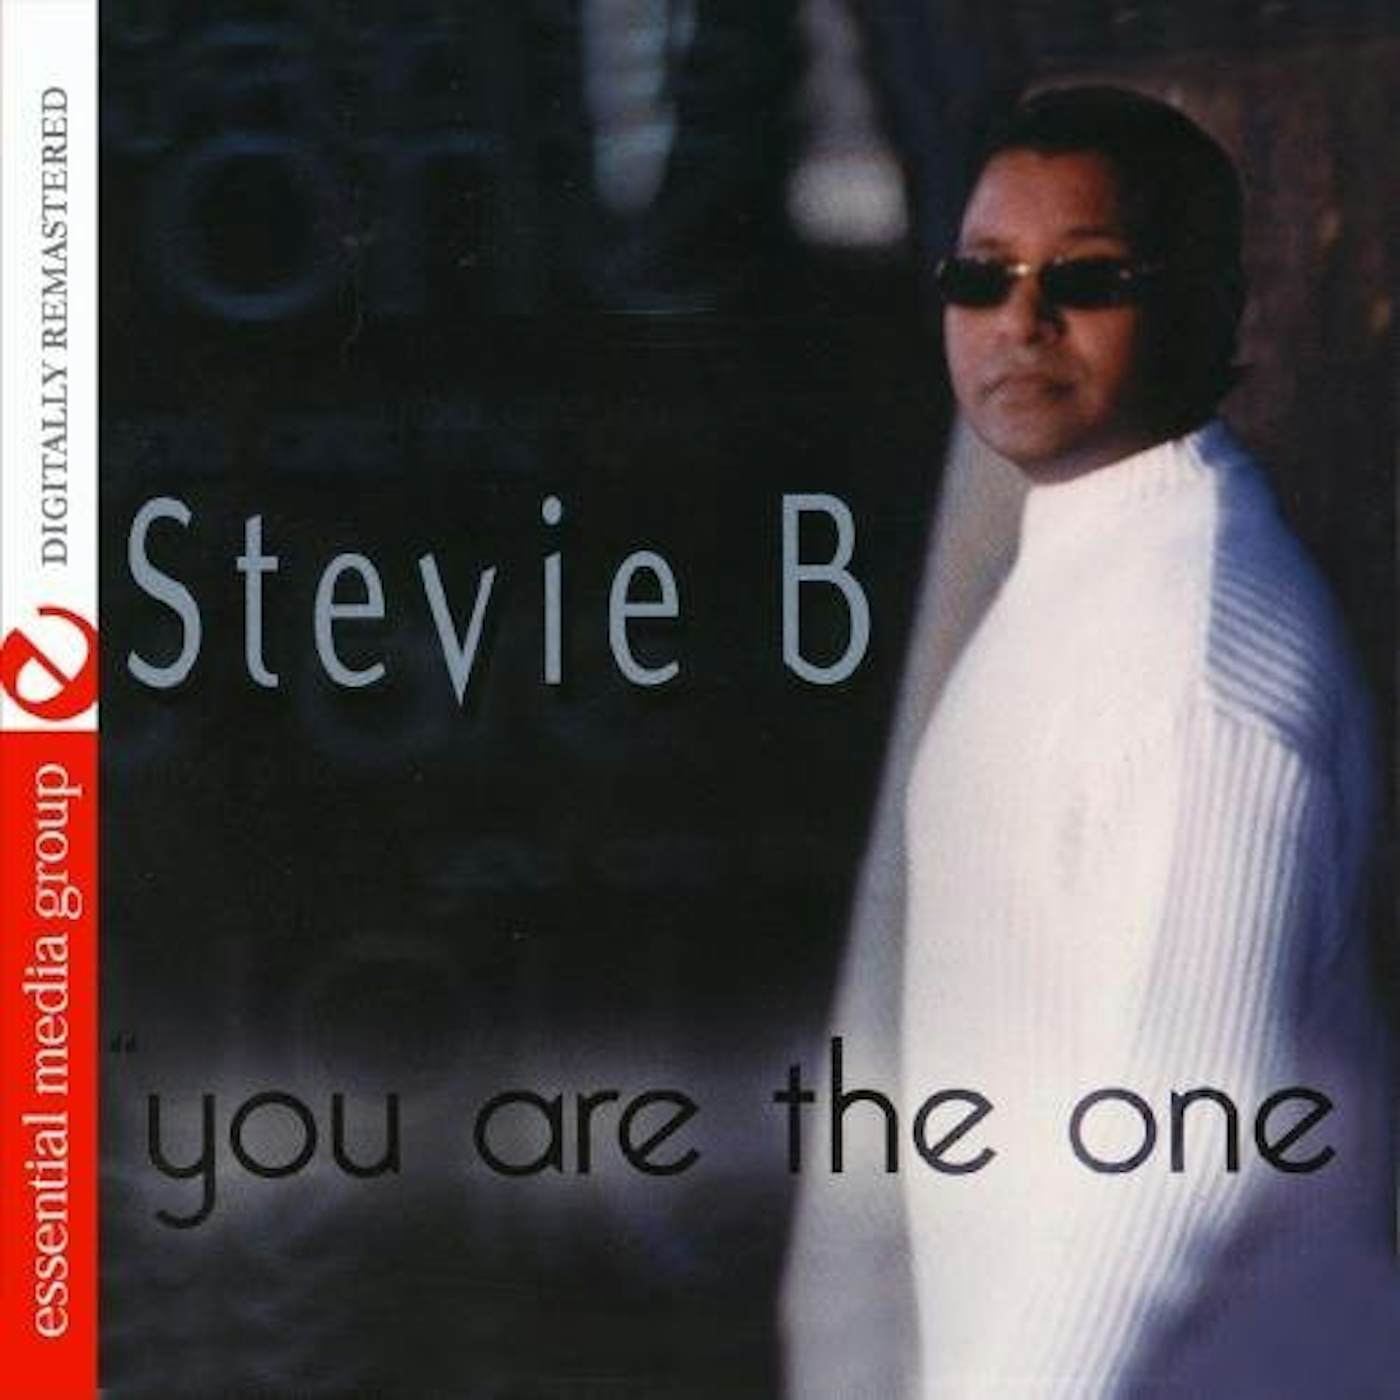 Stevie B YOU ARE THE ONE CD